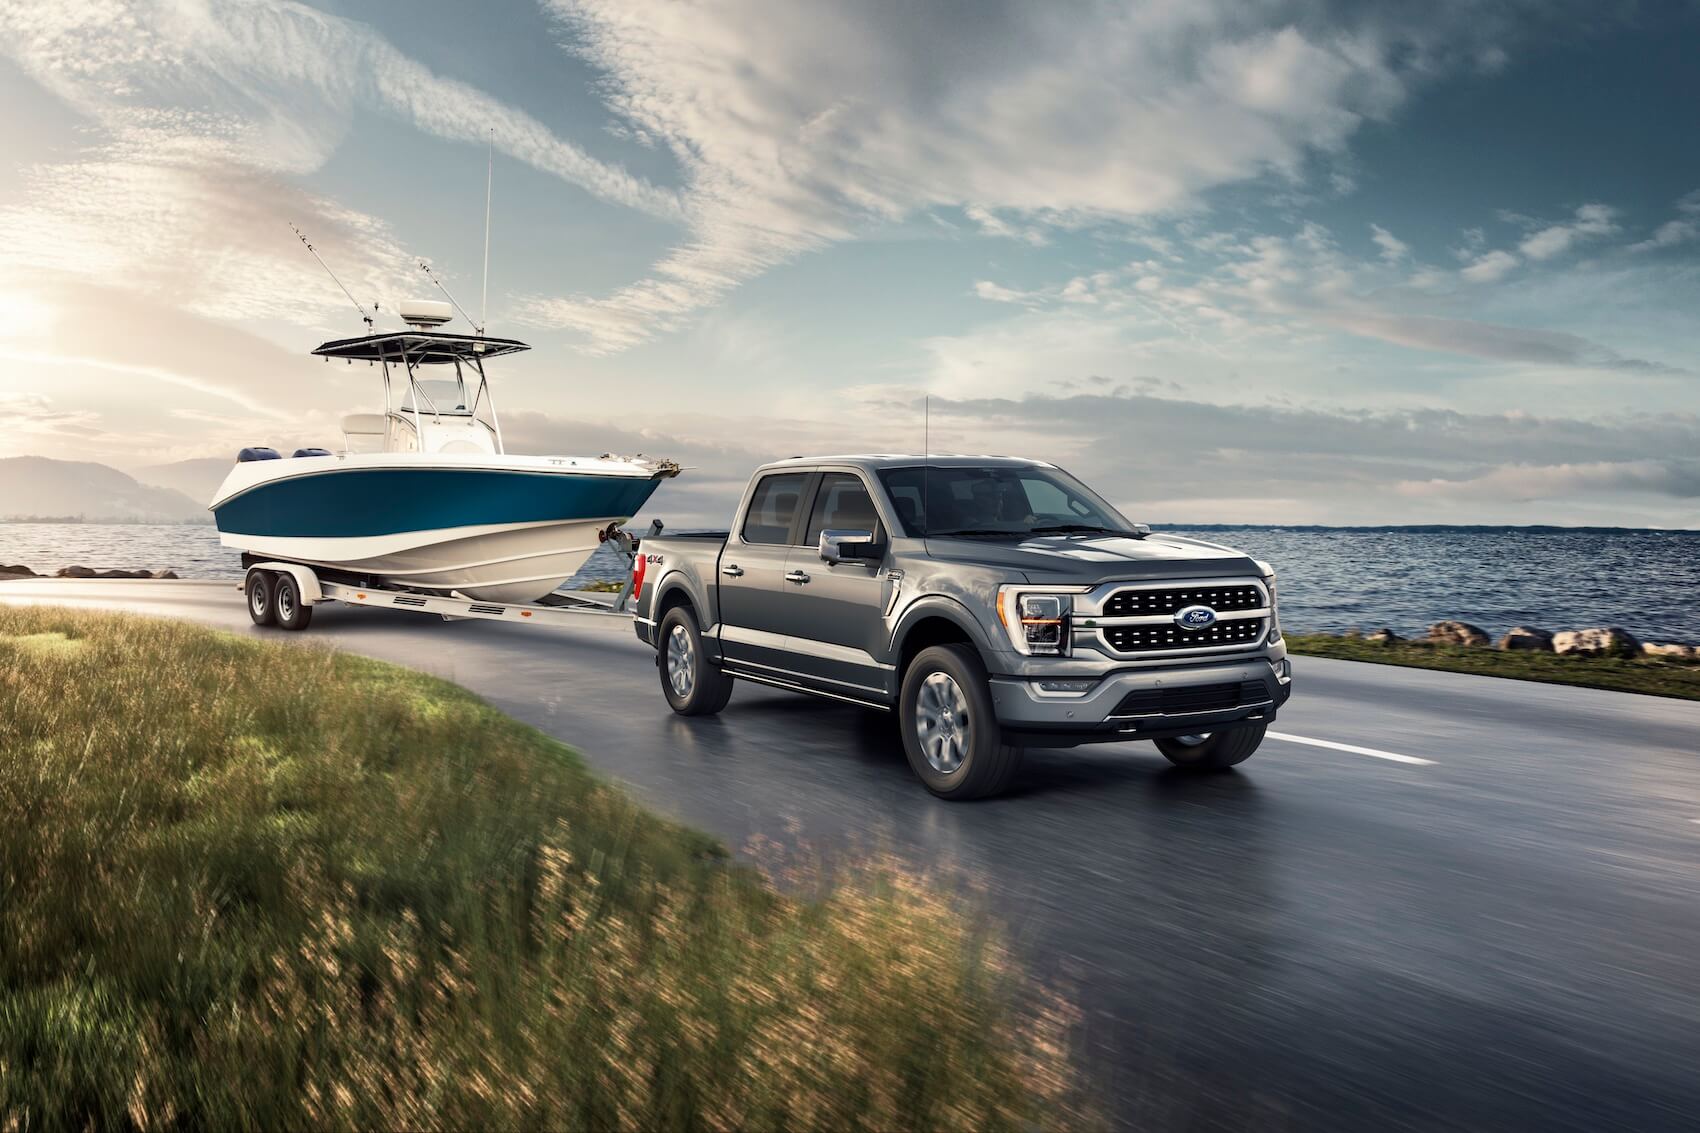 2020 Ford F-150 Review Jasper AL | Bill Penney Ford 2020 Ford F 150 V6 Towing Capacity